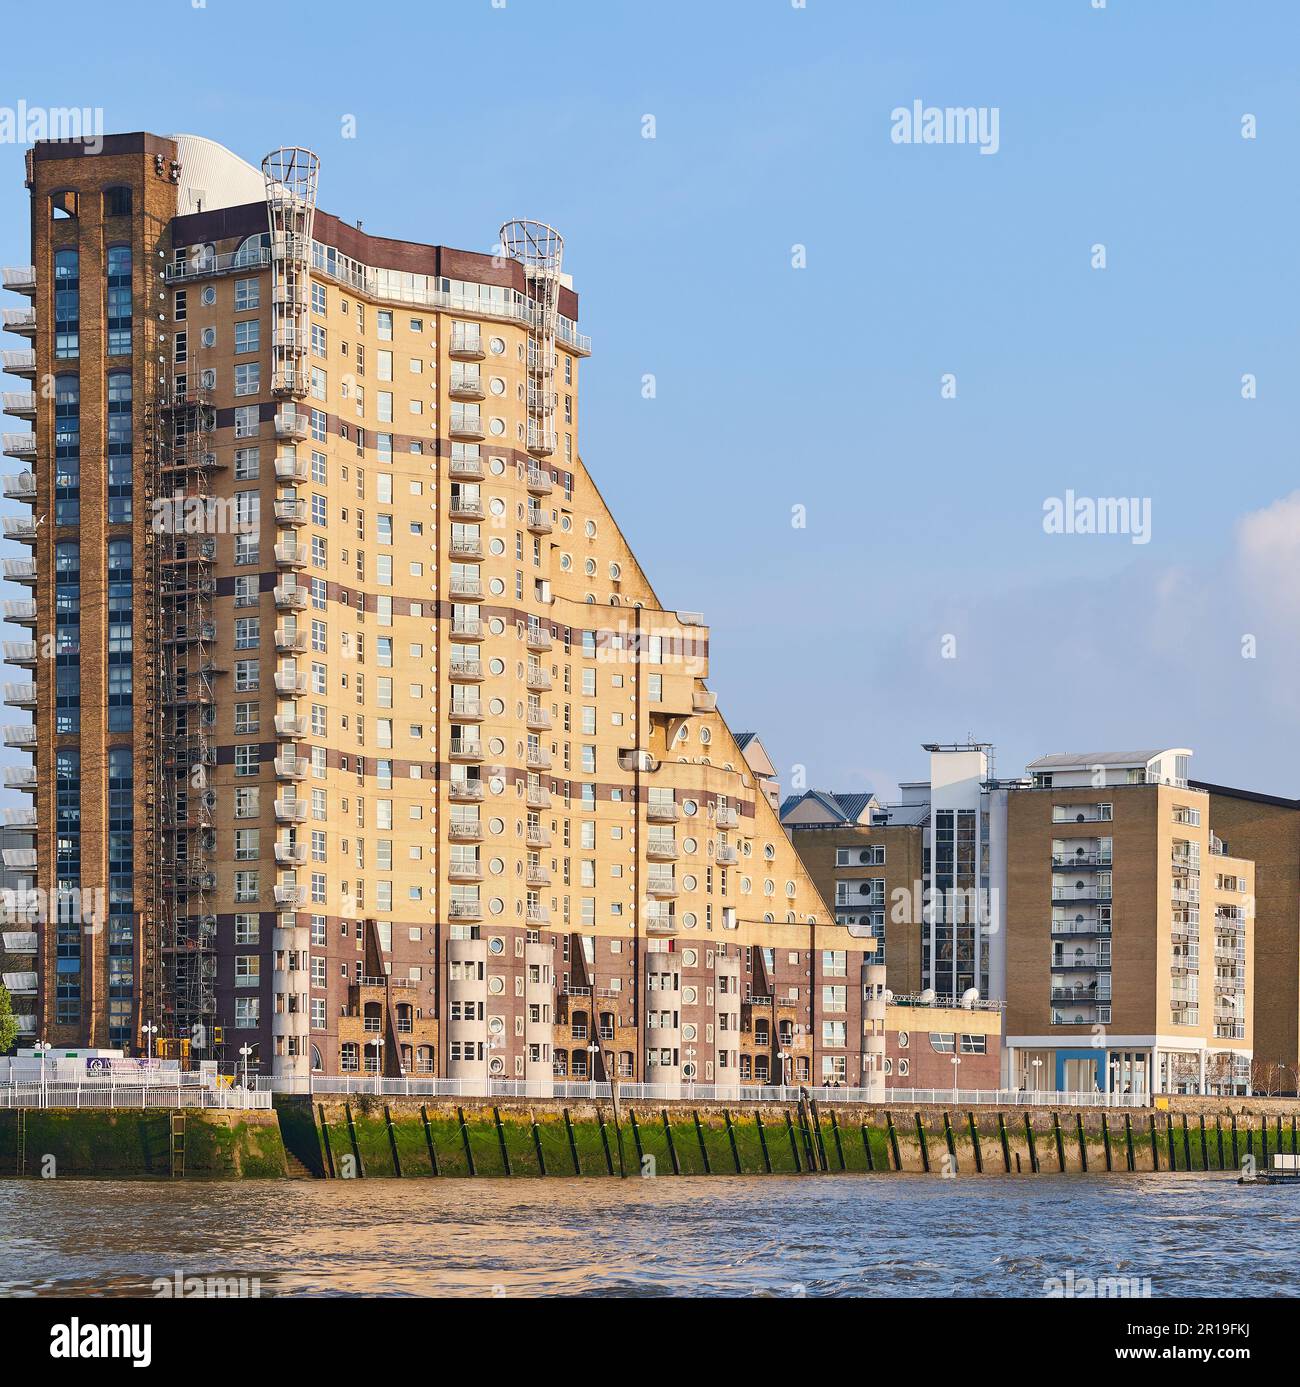 Cascades Tower, a block of apartments on the bank of the river Thames at the financial district of Canary Wharf, London, England. Stock Photo